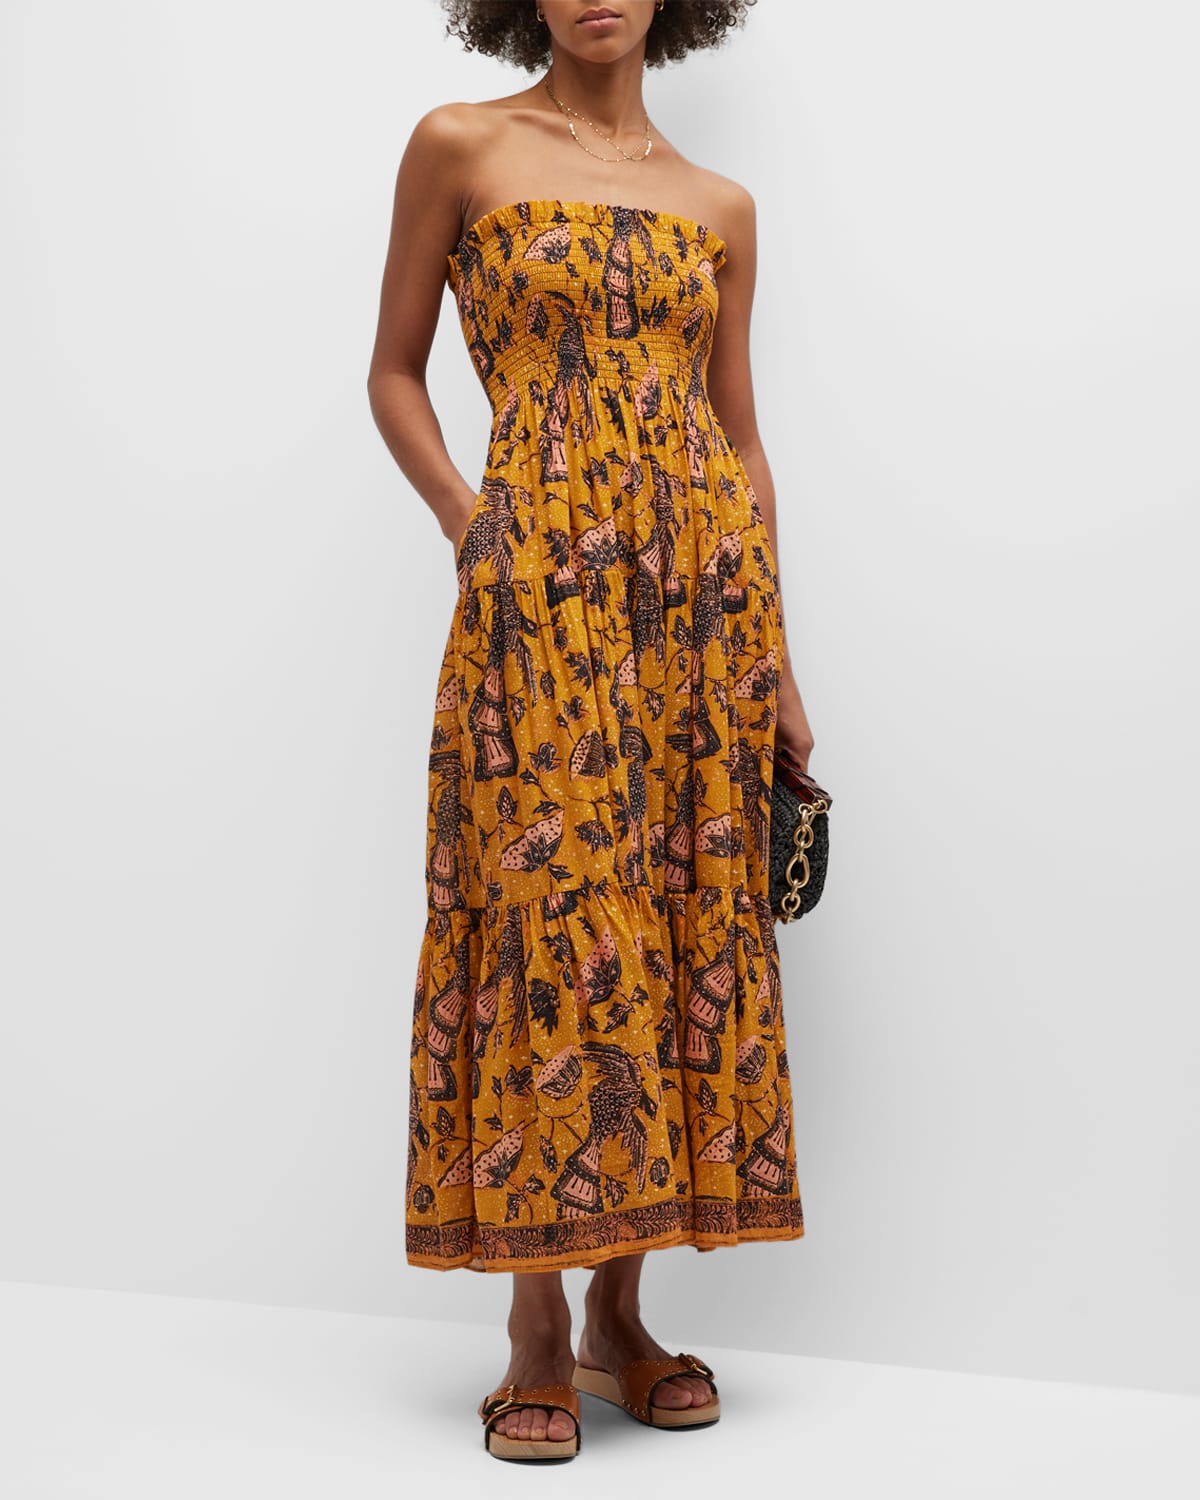 Tory Burch Colorblock Floral Strapless Maxi Dress | Neiman Marcus